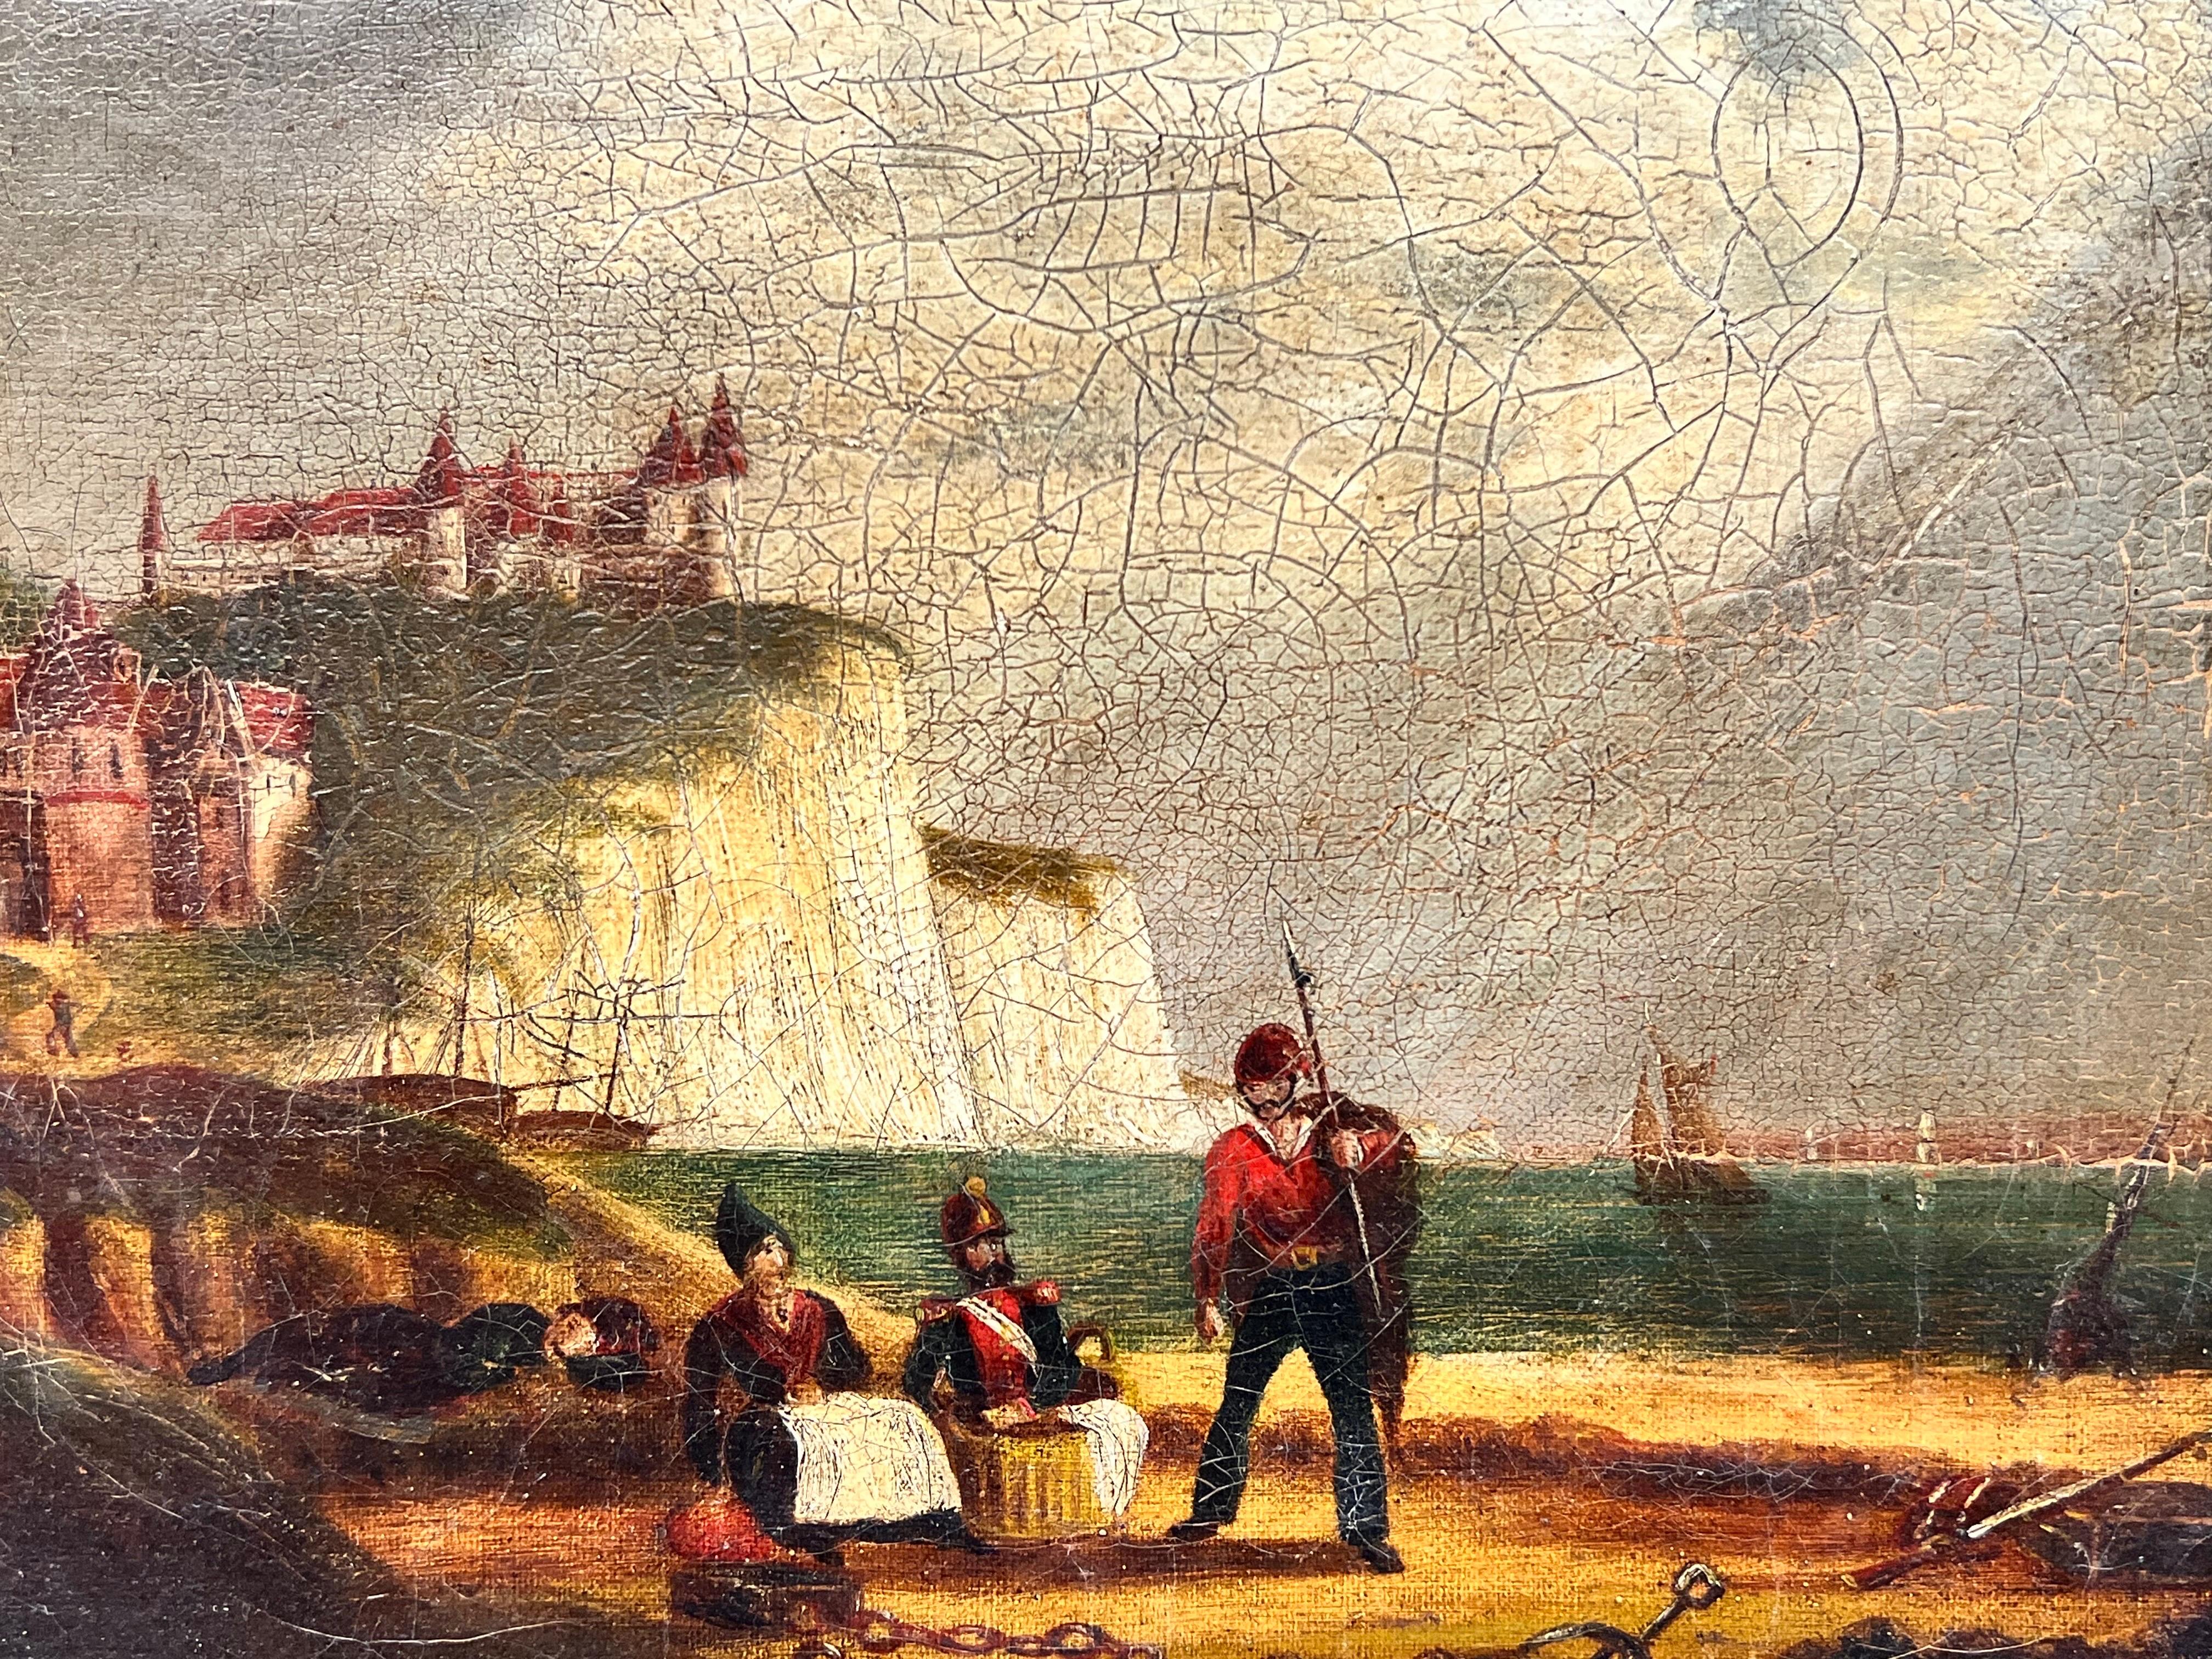 painting from the 1800s